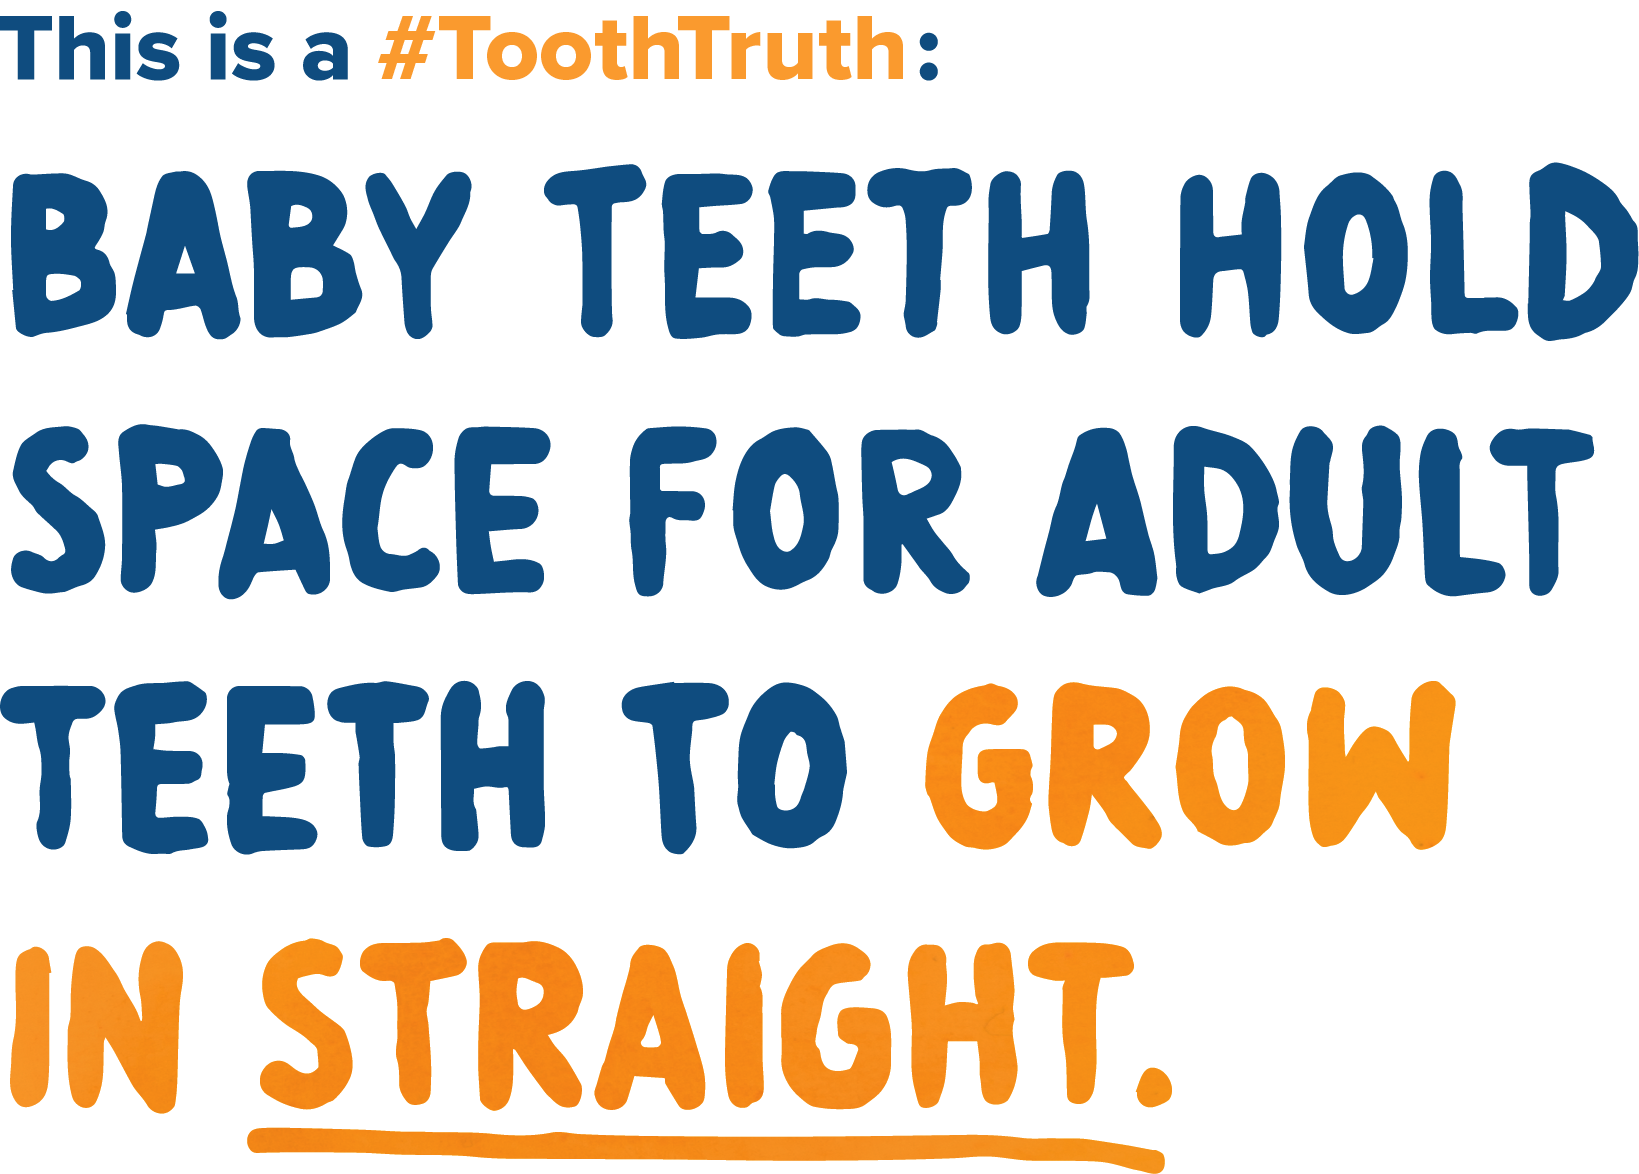 Baby teeth hold space for adult teeth to grow in straight.